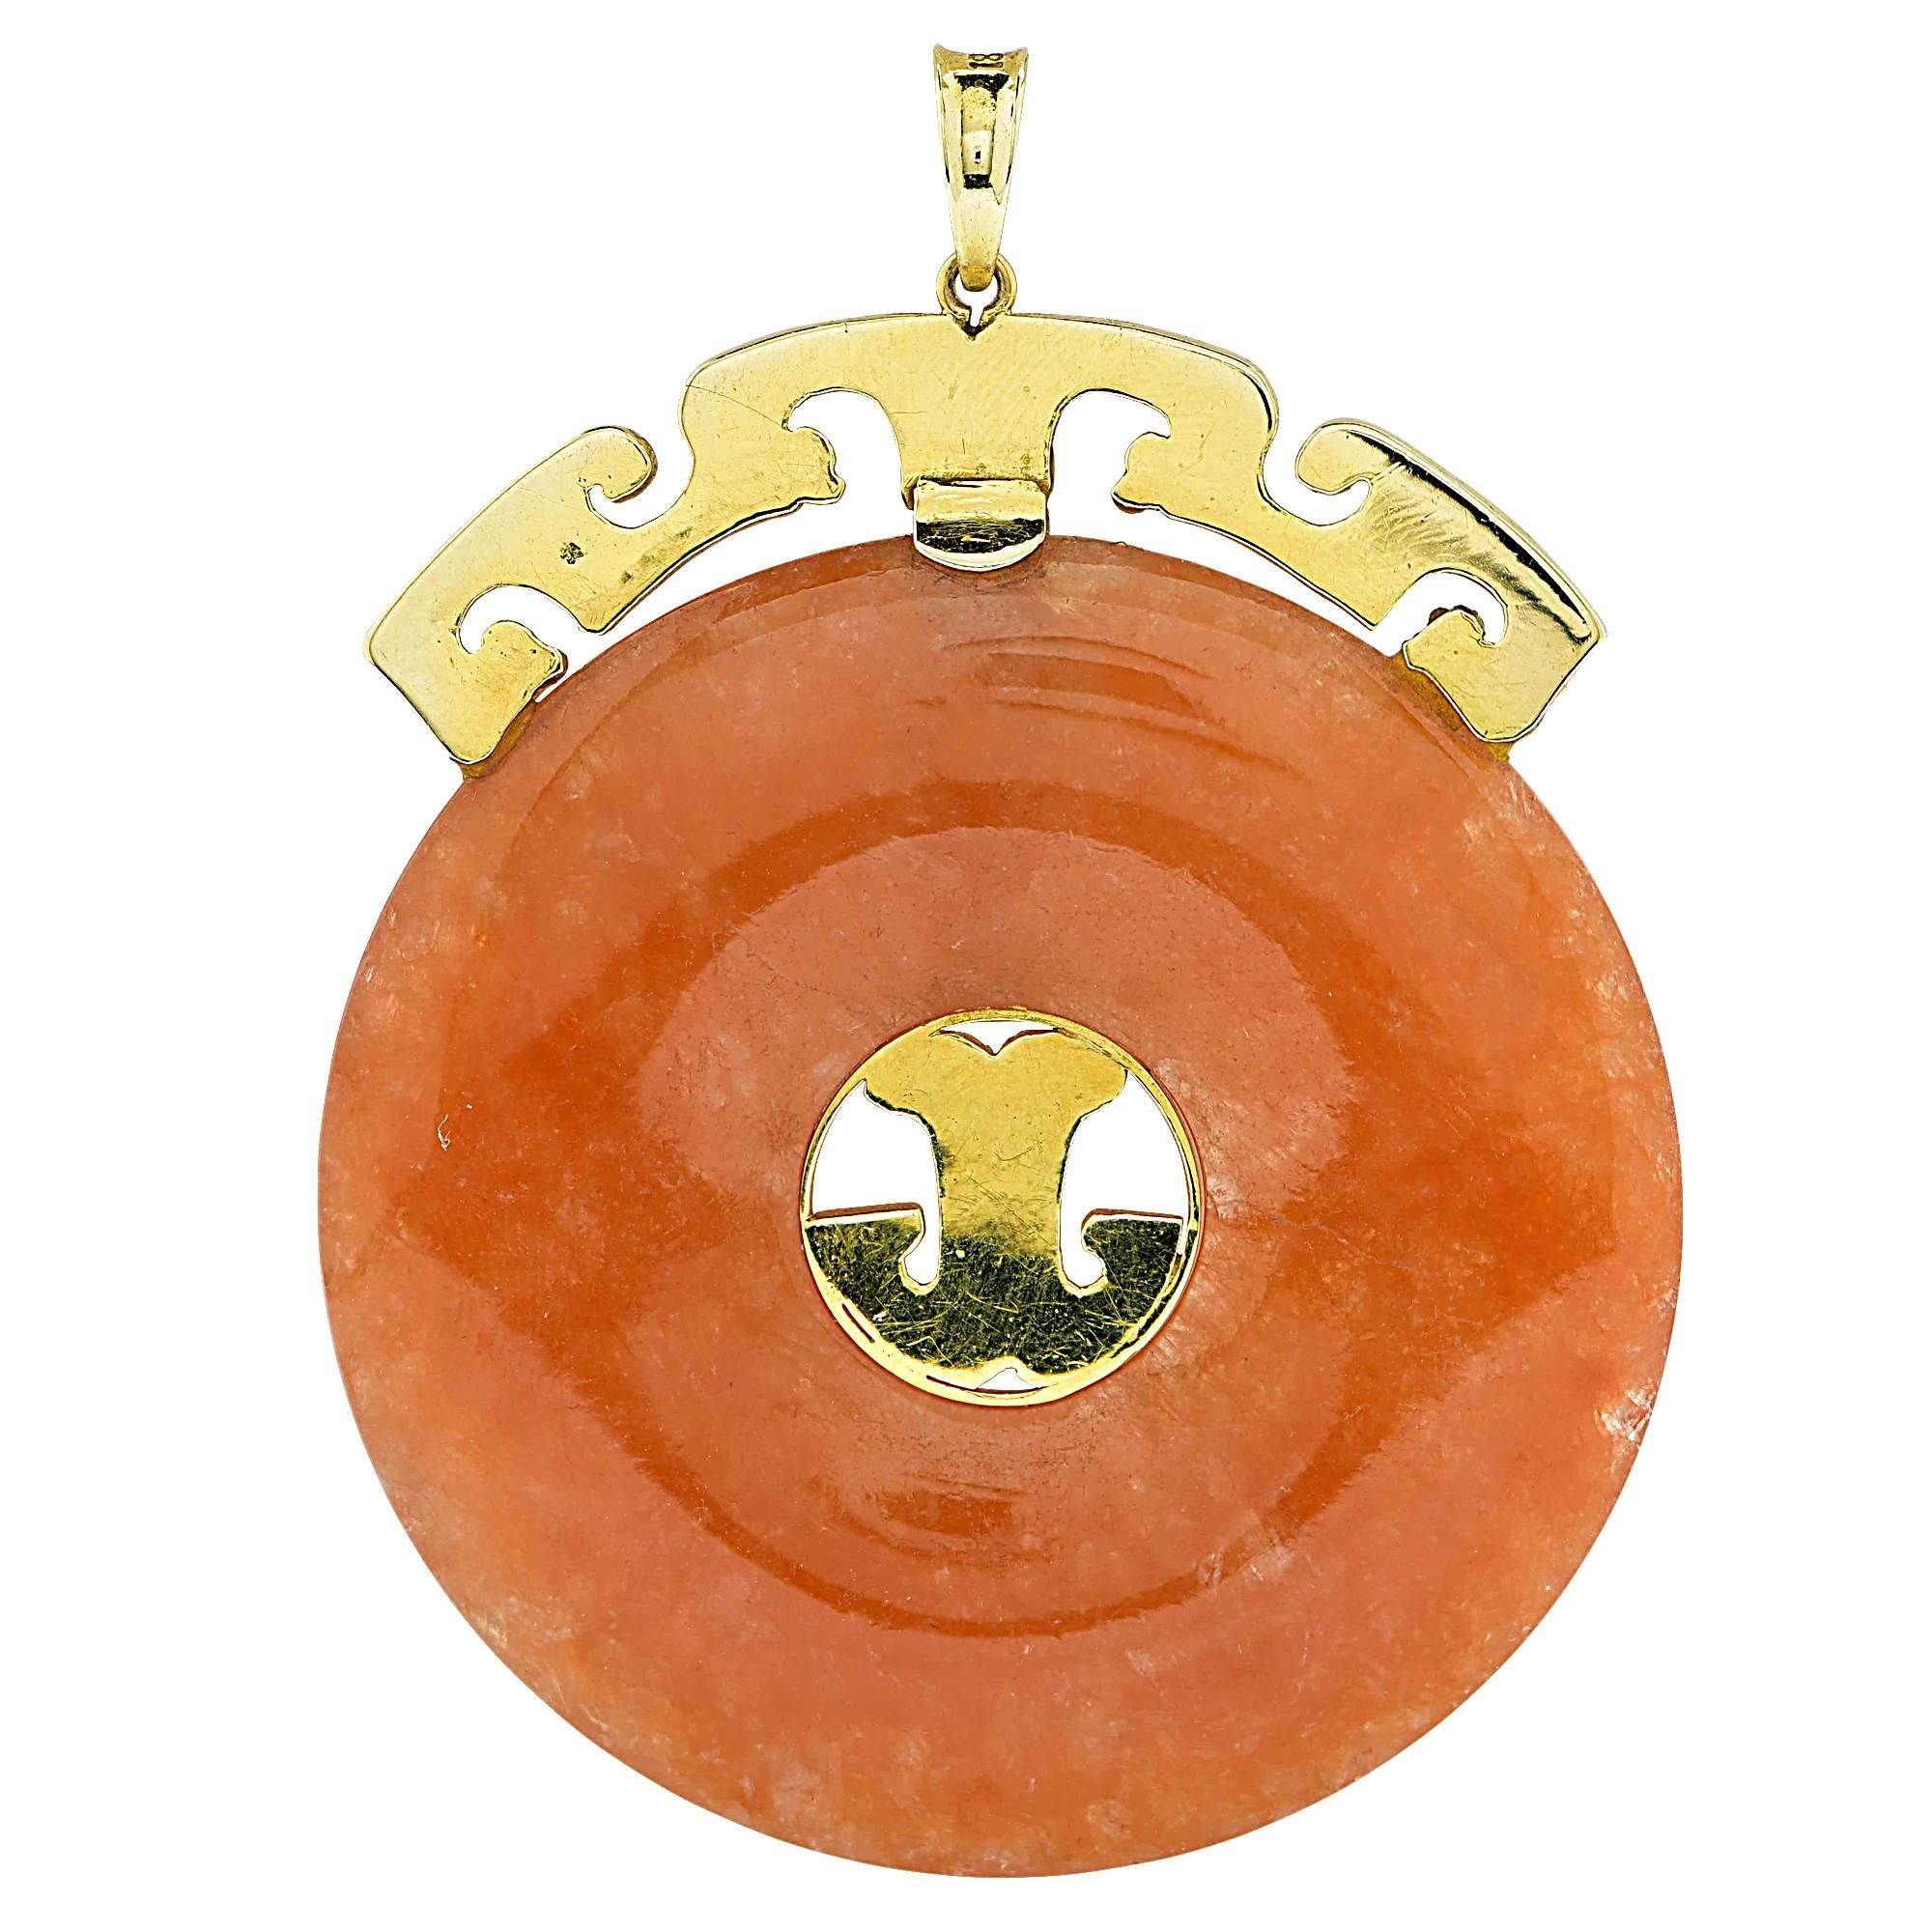 Most people think of green when they think of jade. Jadedite is white in its pure form and appears in a wide range of colors. This intriguing orange jade pendant contains a large circular carving accented by yellow gold. Orange jade is said to bring